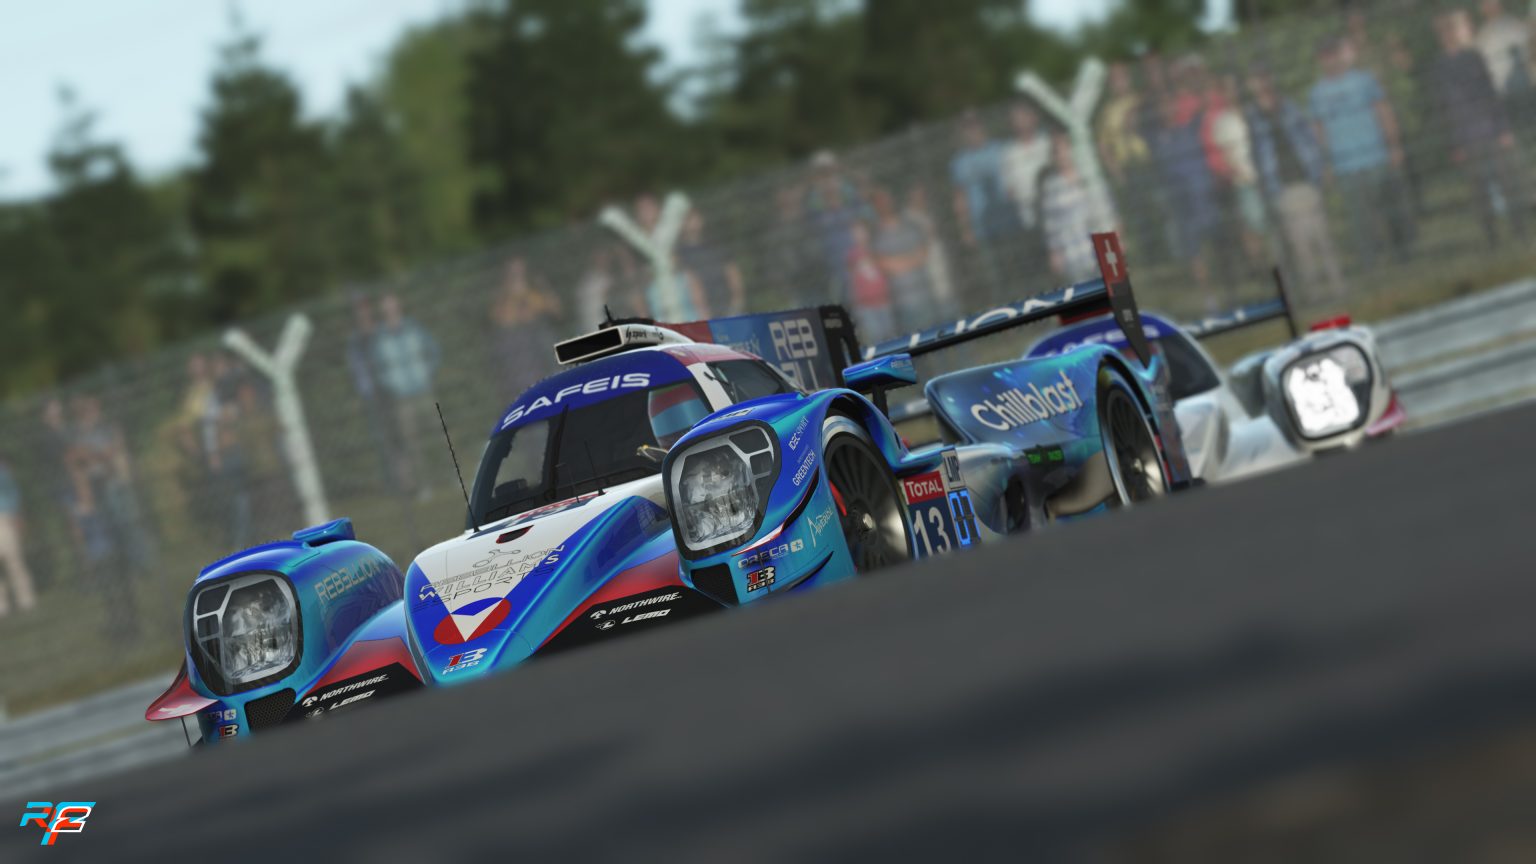 rfactor 2 Behind the scenes at Virtual Le Mans 24 Hours